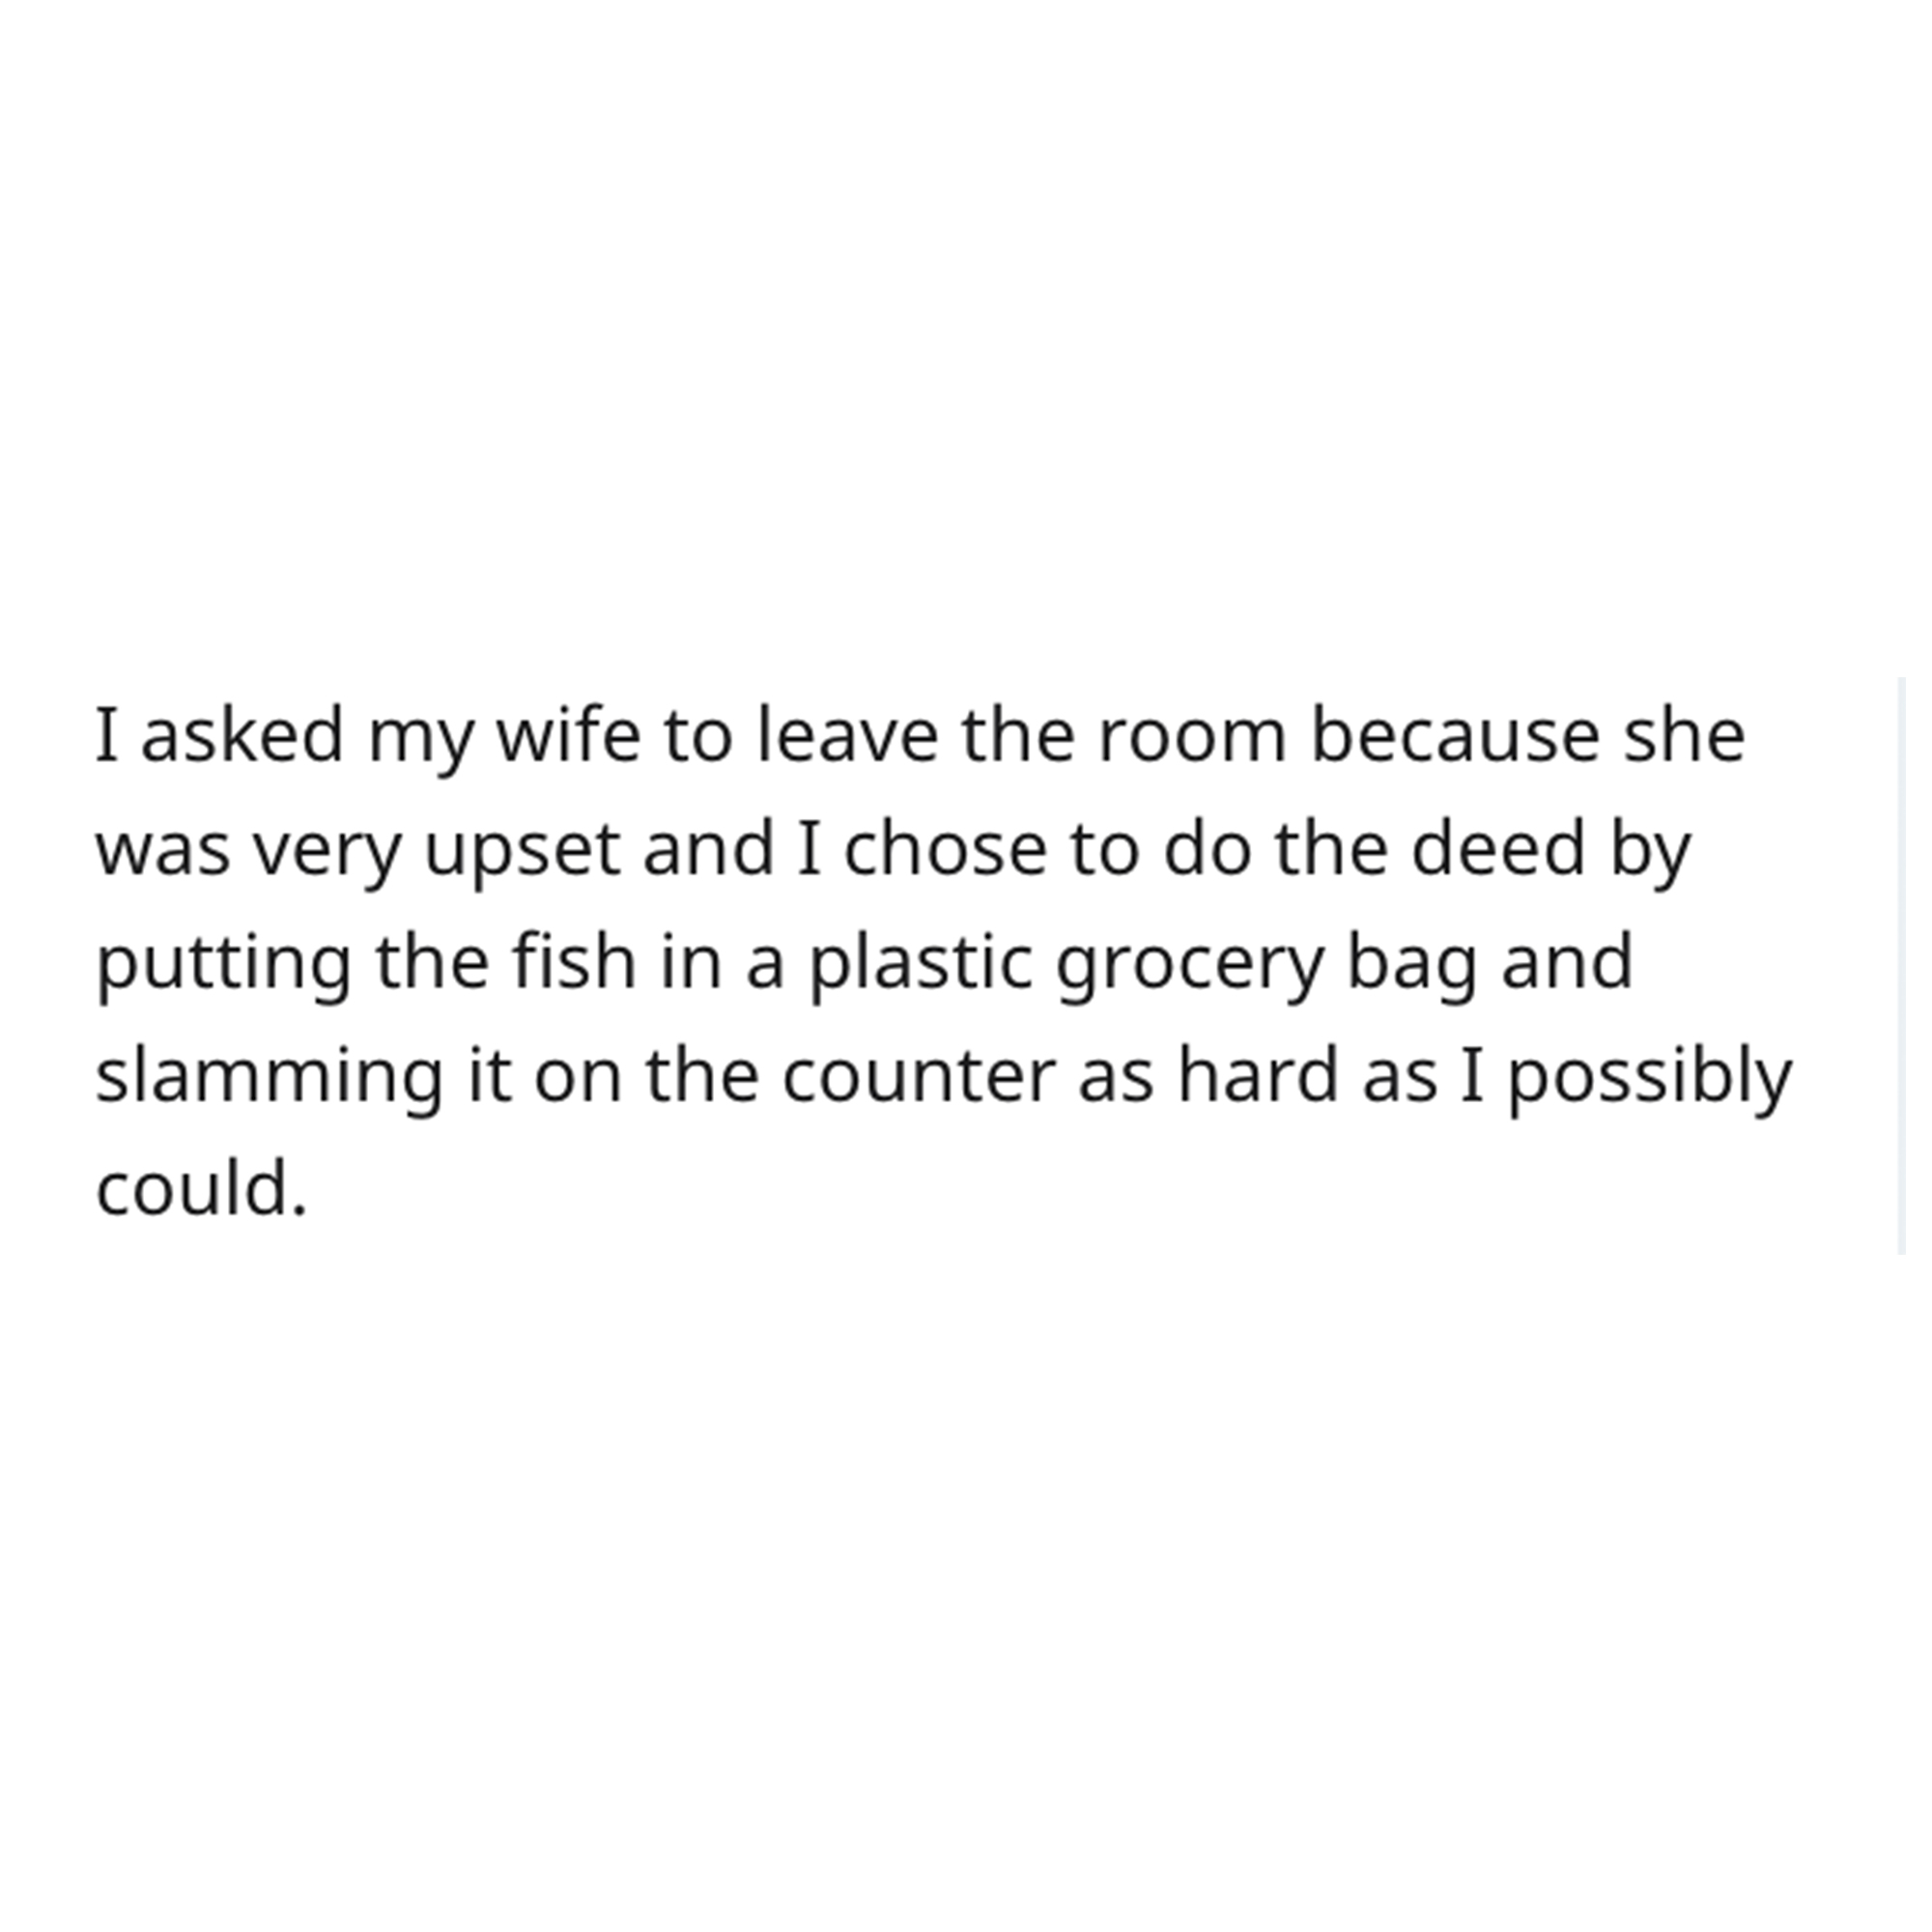 goldfish story - sad deep late night thoughts - I asked my wife to leave the room because she was very upset and I chose to do the deed by putting the fish in a plastic grocery bag and slamming it on the counter as hard as I possibly could.